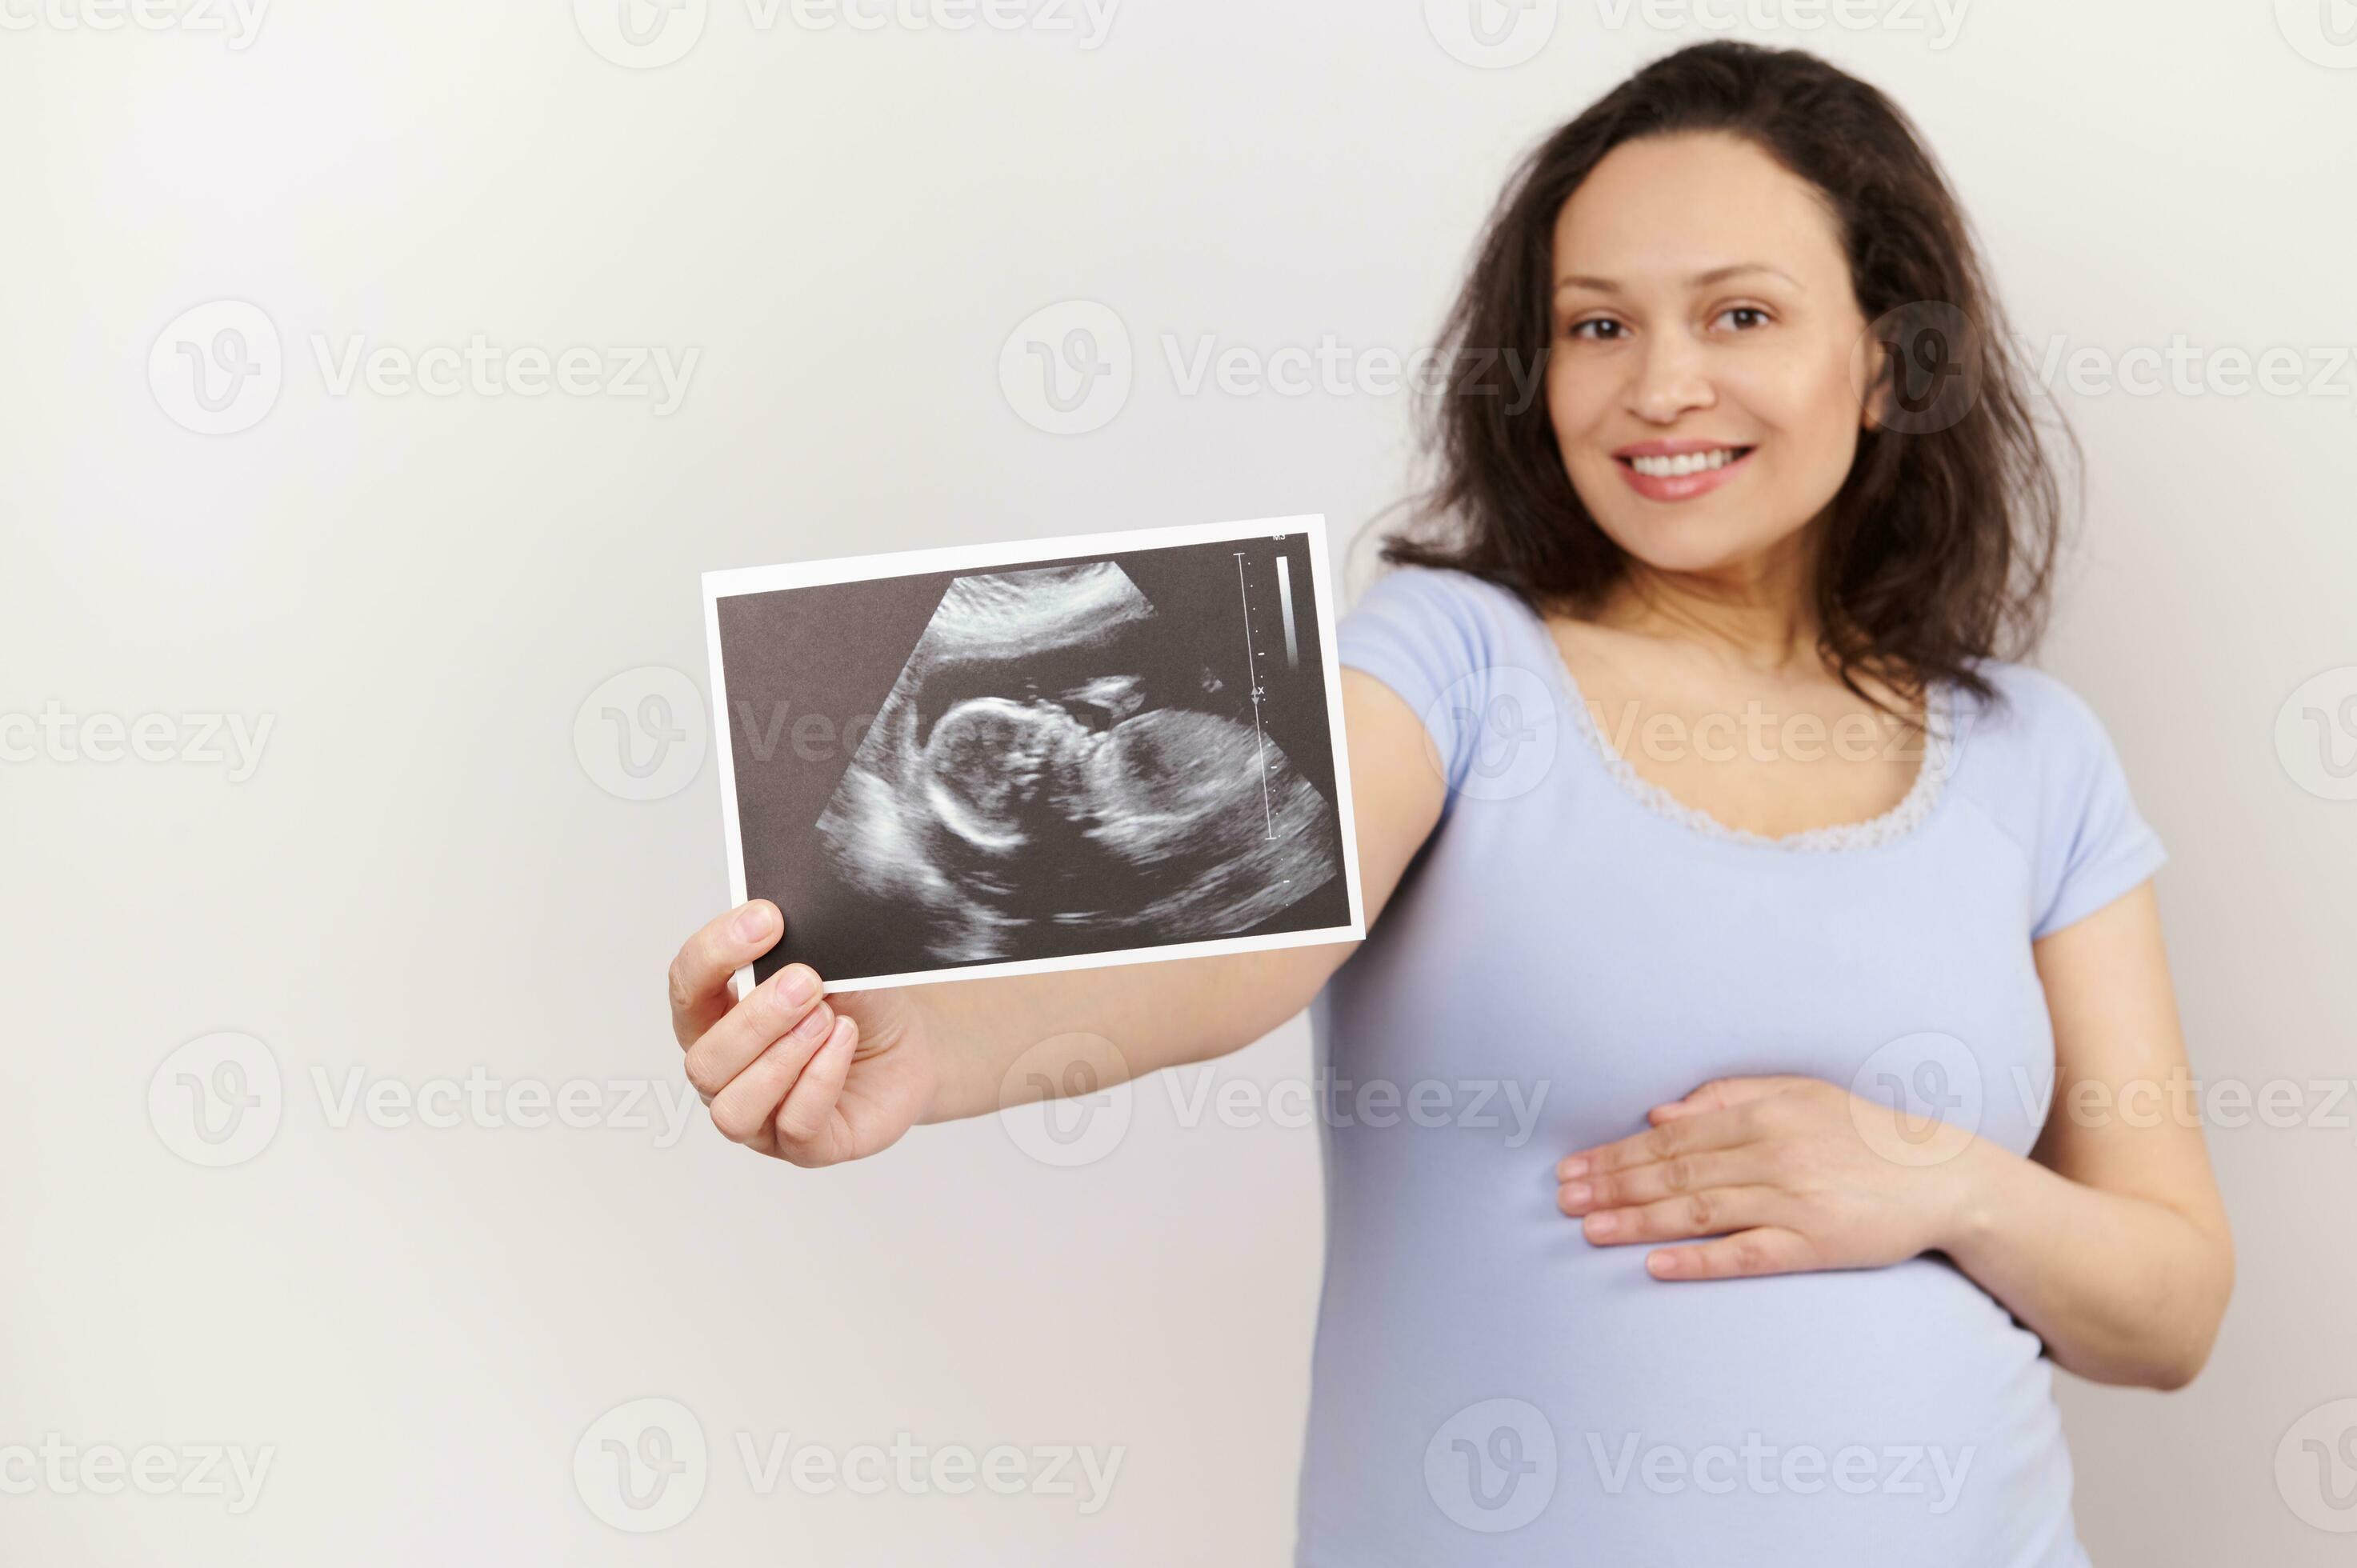 https://static.vecteezy.com/system/resources/previews/023/730/150/large_2x/focus-on-ultrasound-scan-image-baby-sonography-in-the-hand-of-a-smiling-pregnant-woman-isolated-on-white-background-photo.jpg